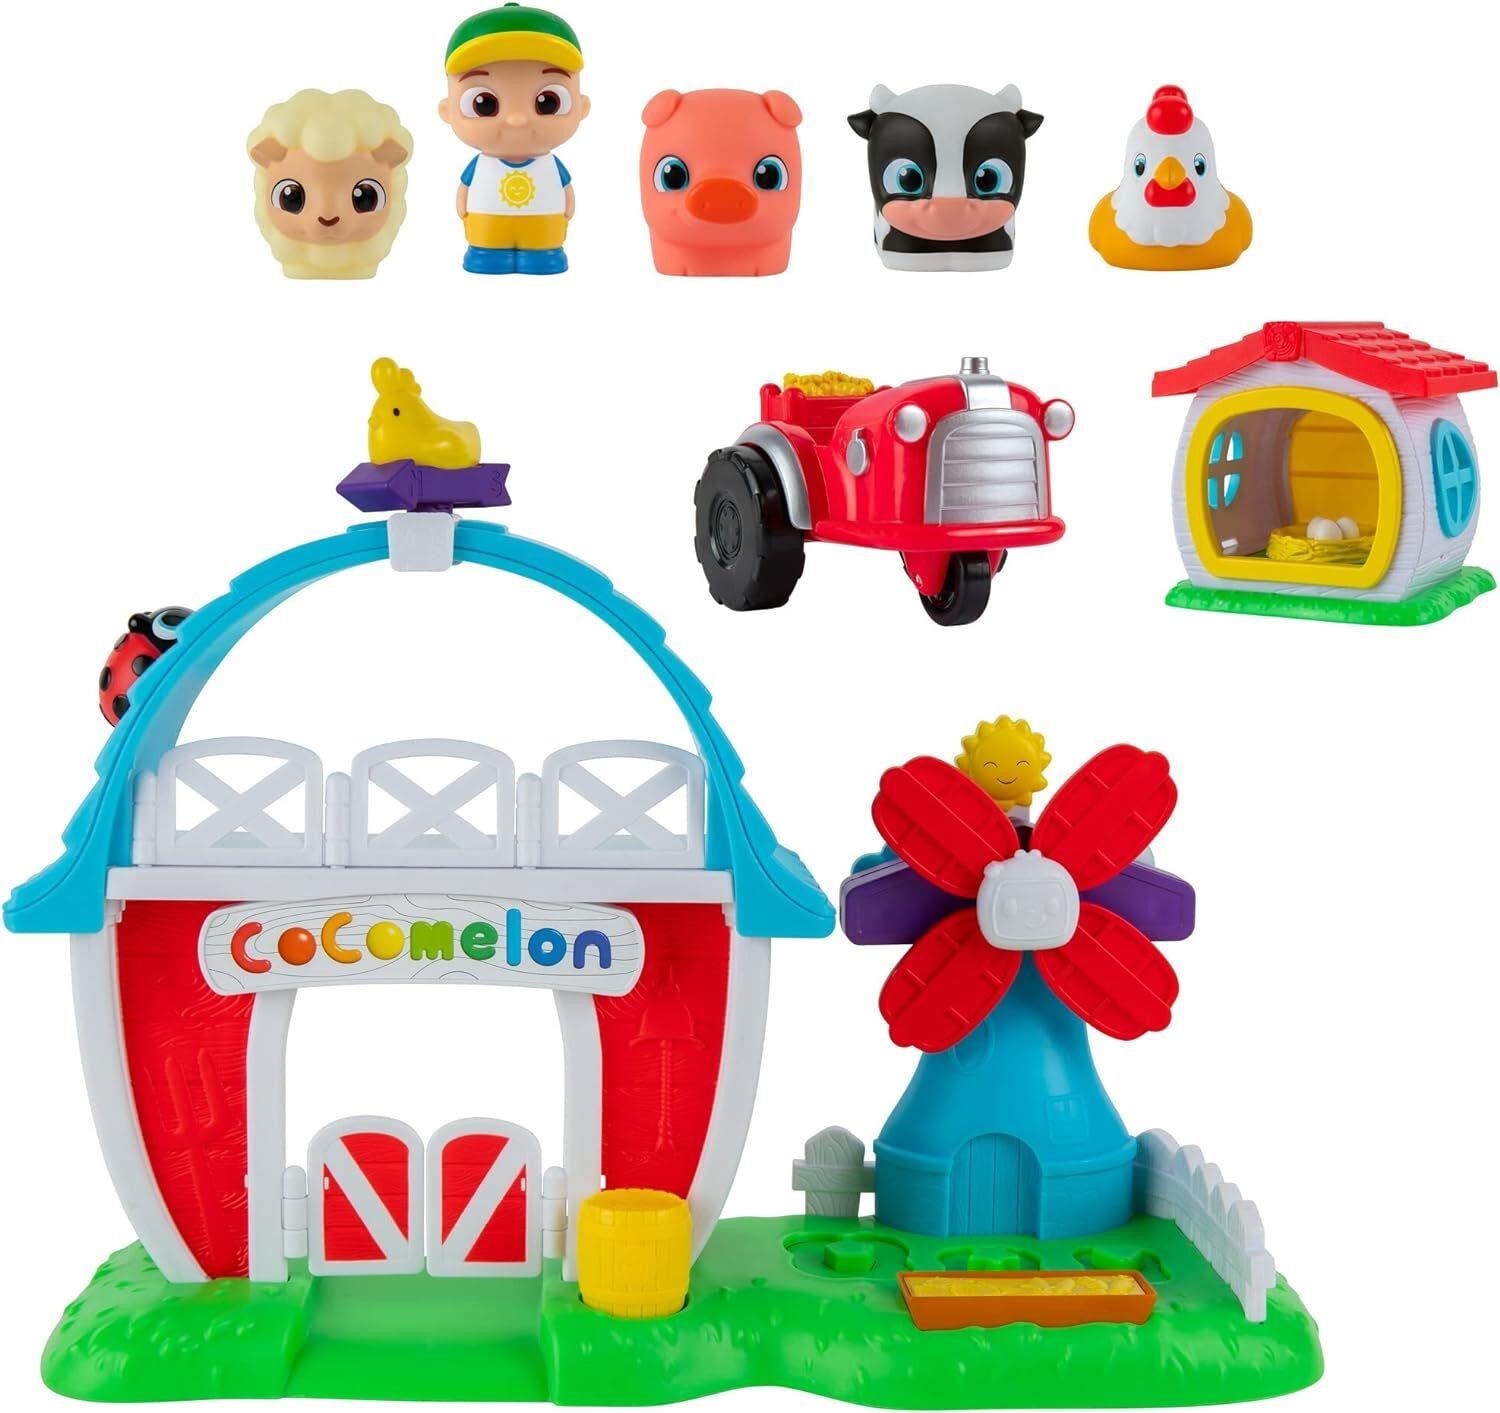 CoComelon Petting Farm Playset - Toys for Kids